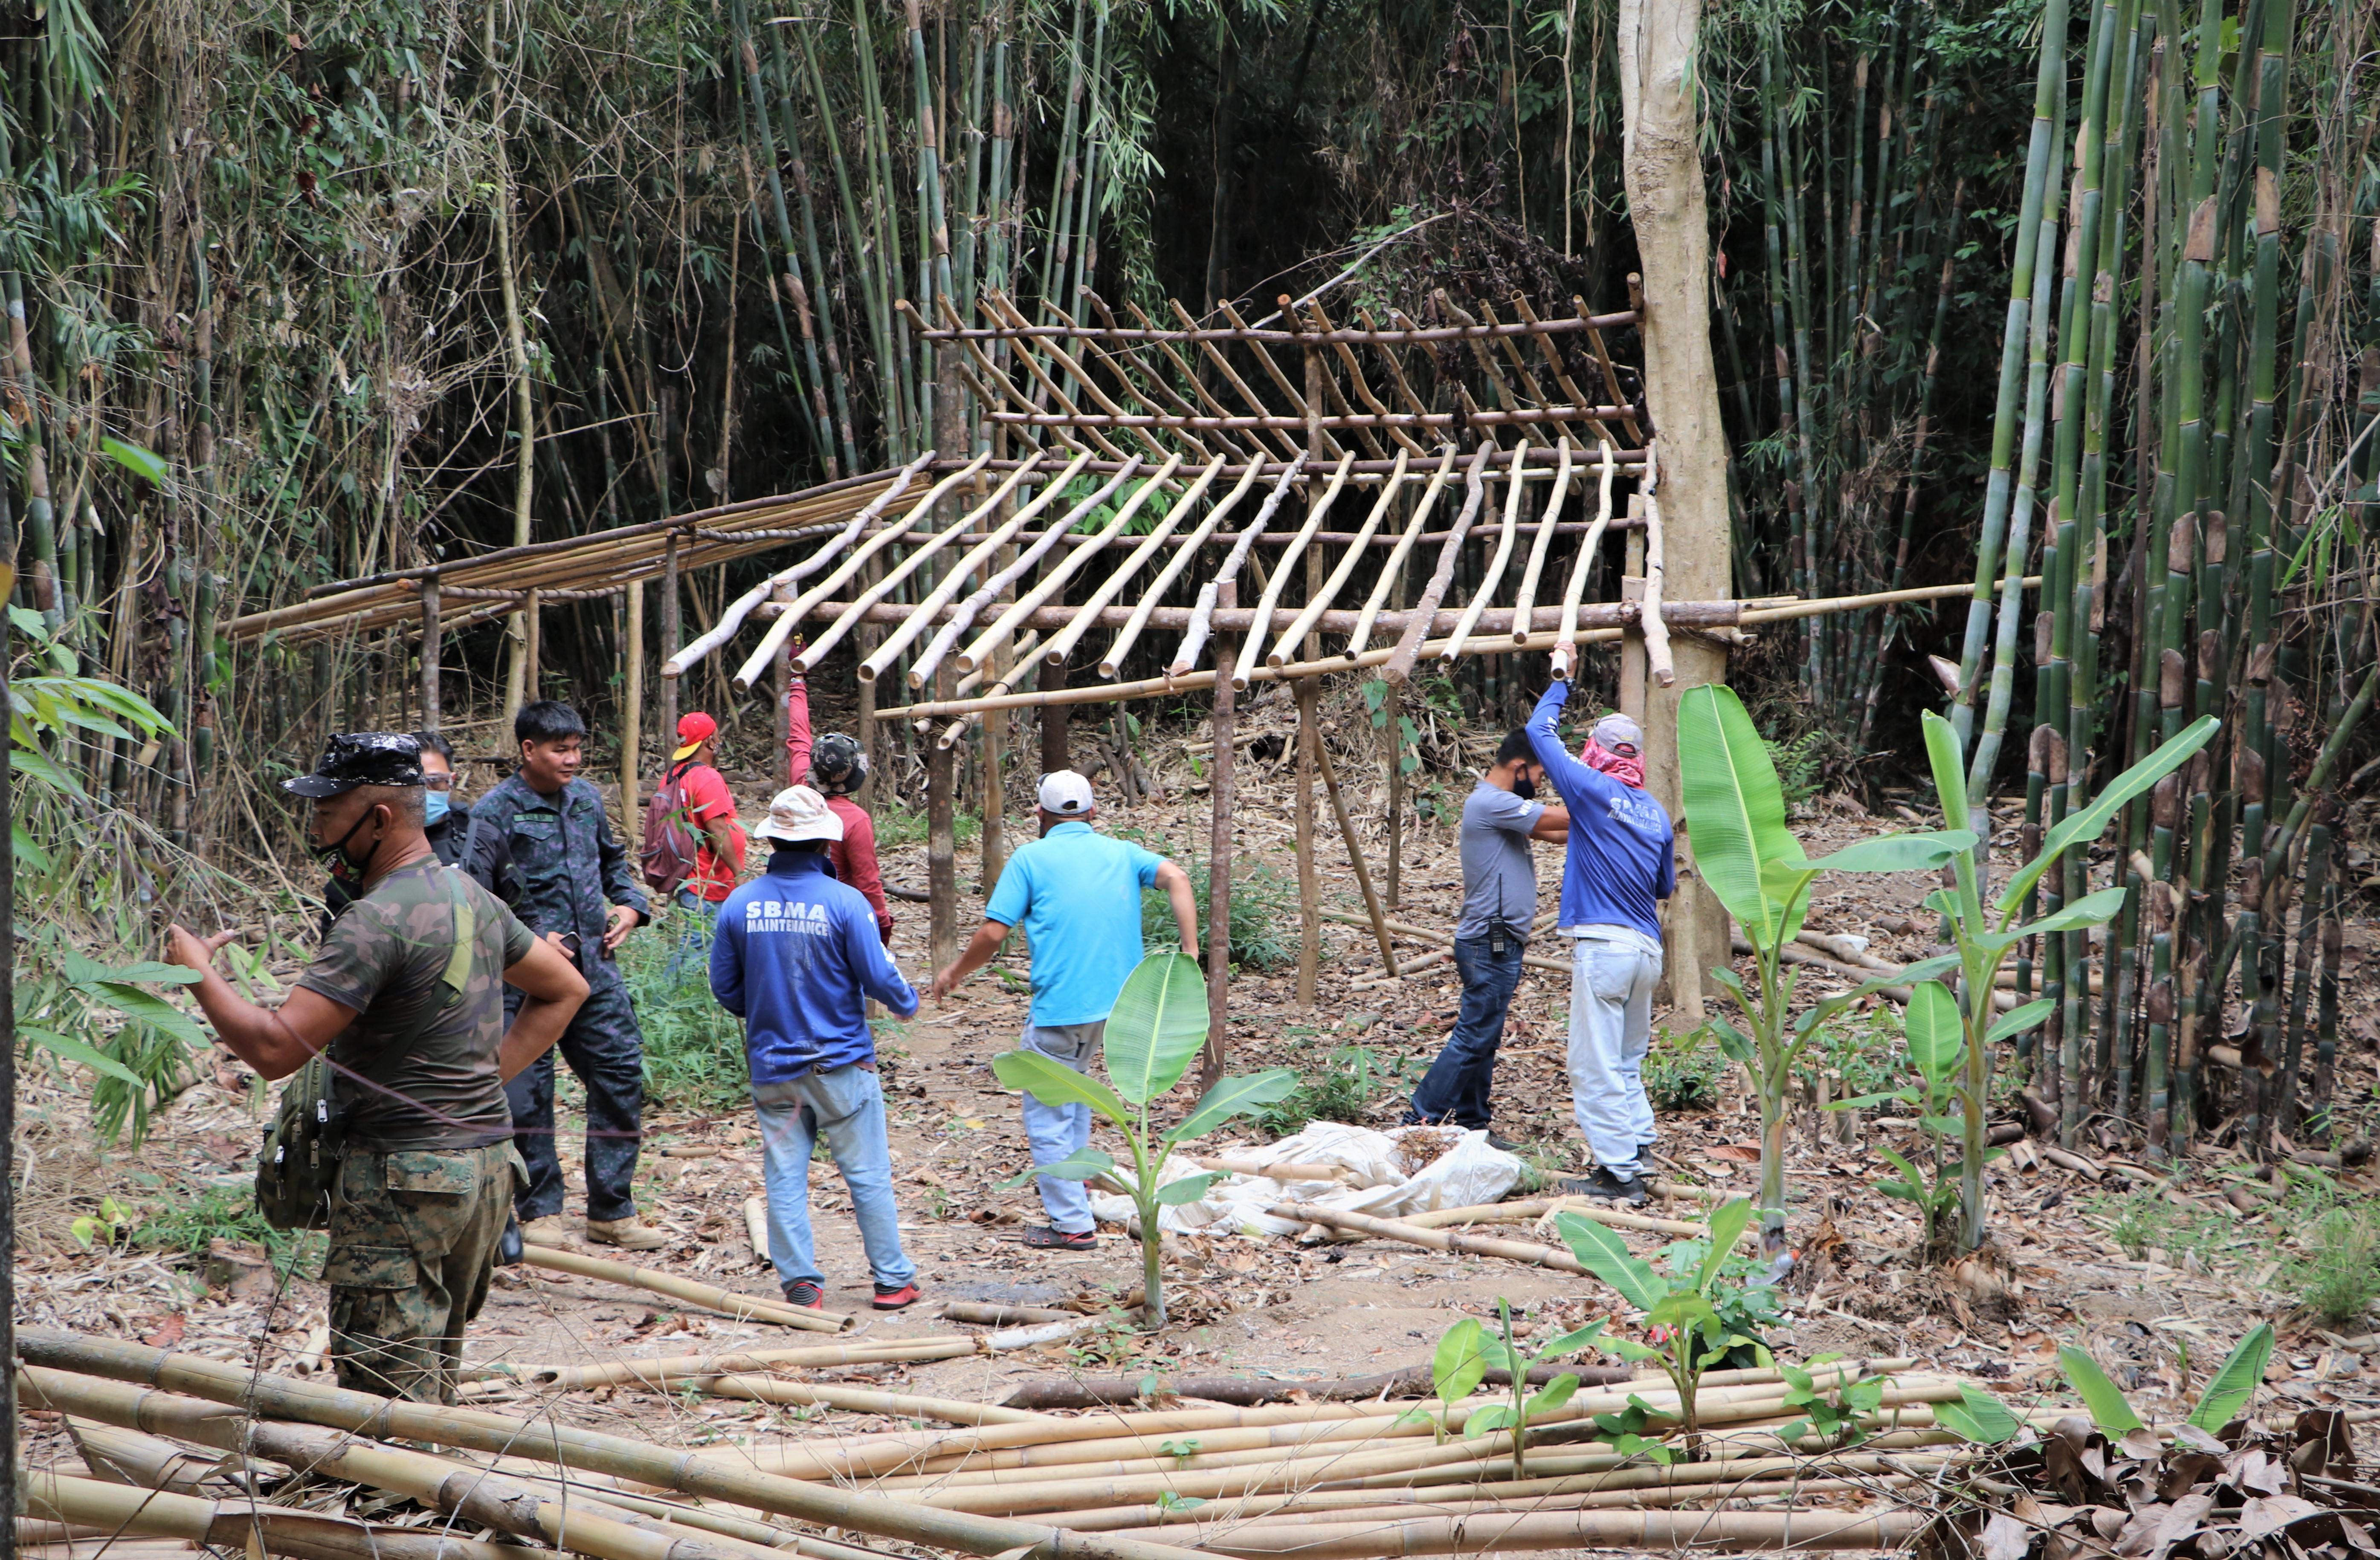 SBMA workers start dismantling a hut built in an illegally-cleared area near the Subic Bay Expressway